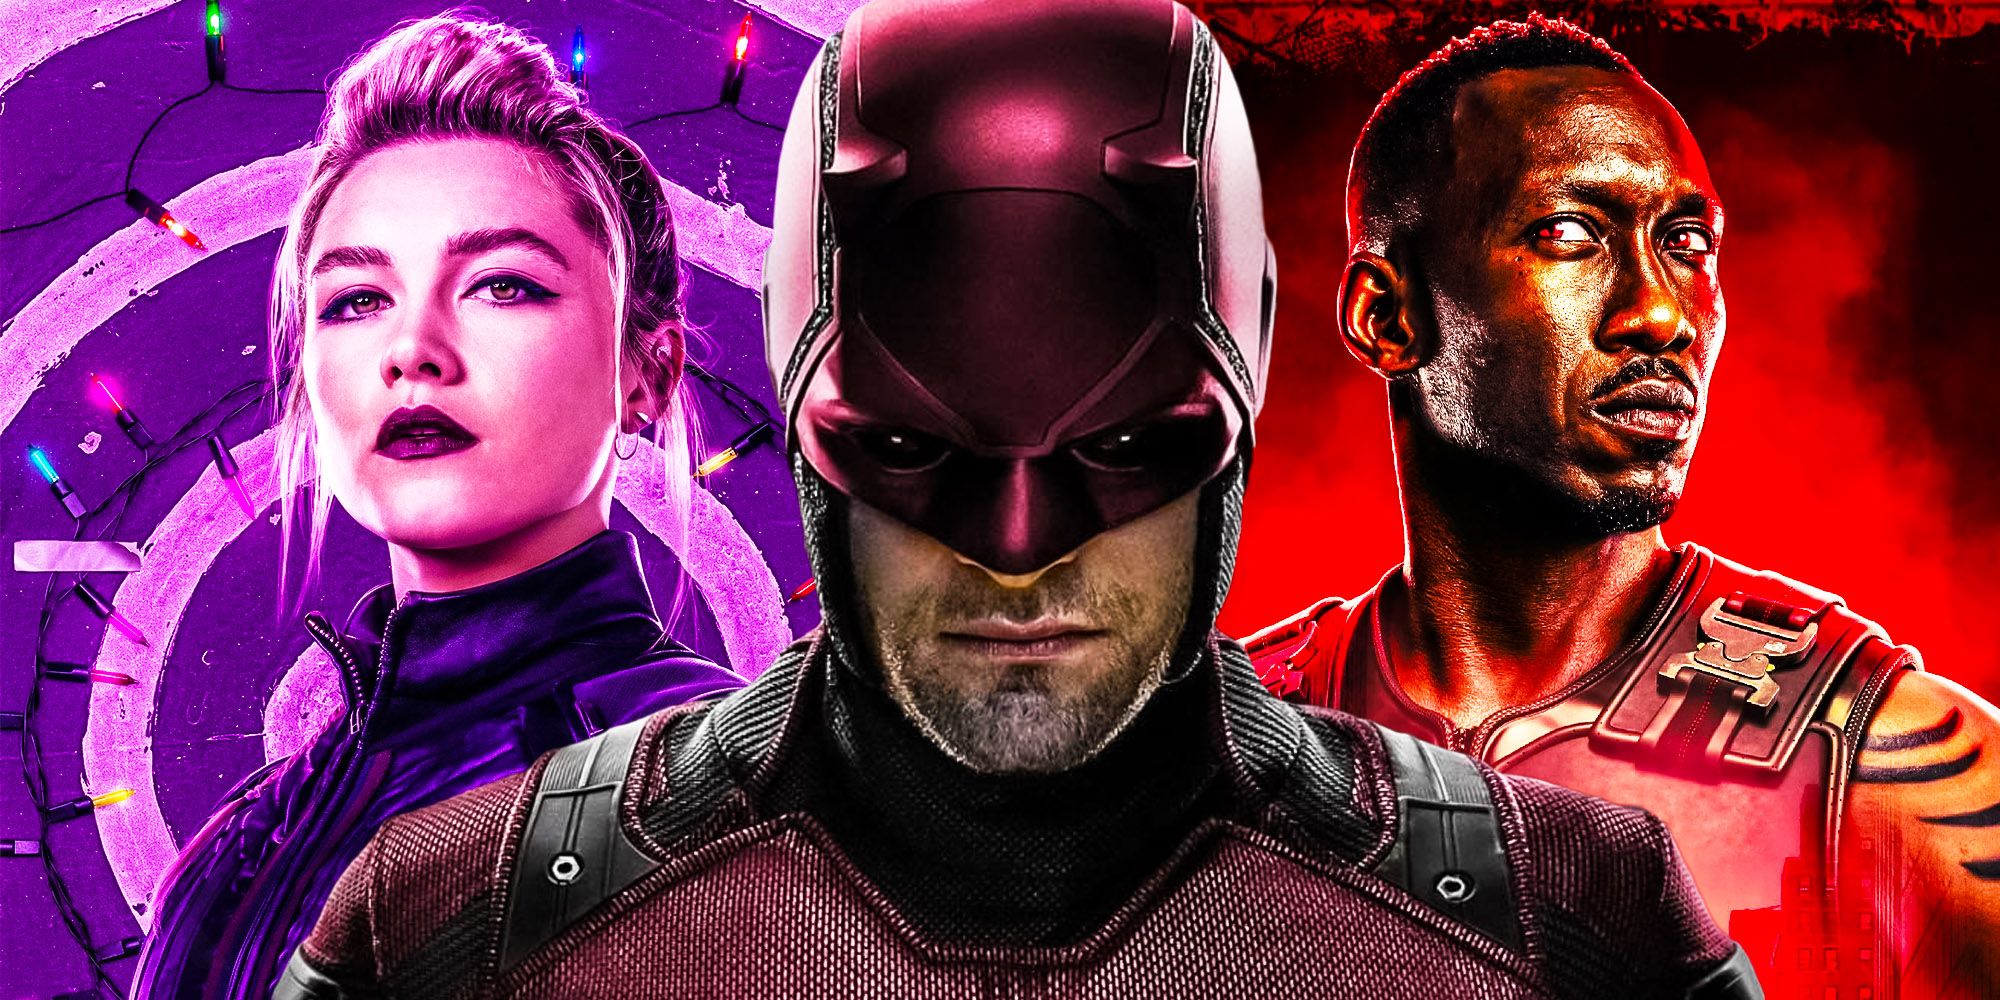 Daredevil, Blade, and Yelena Belova in upcoming Marvel movies and TV shows.